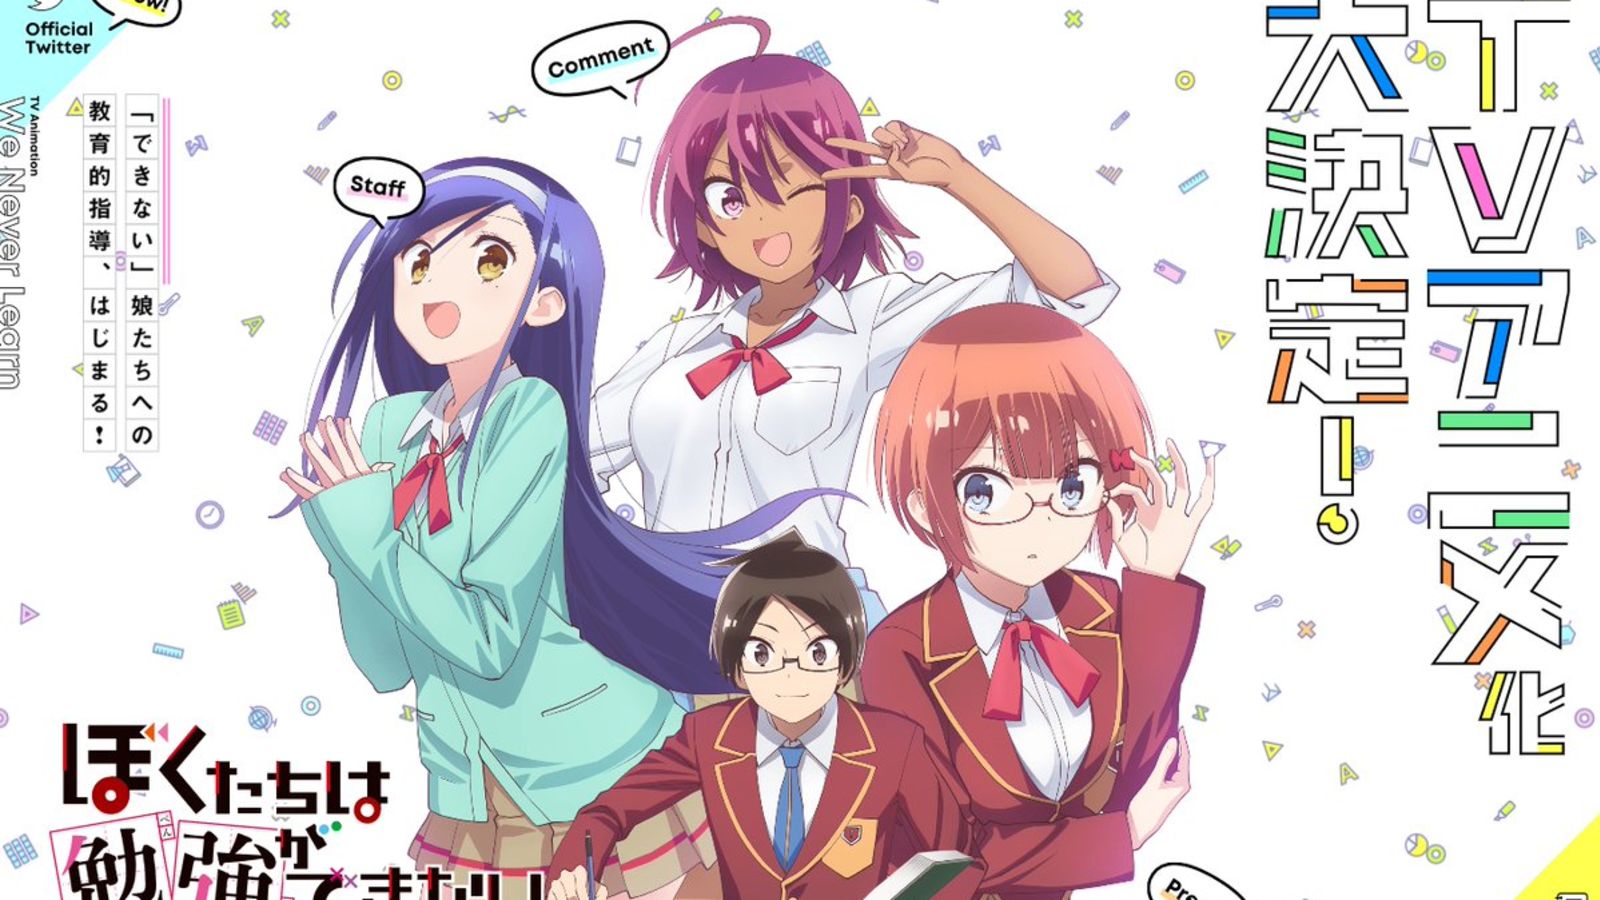 The anime of We Never Learn will premiere on April 6